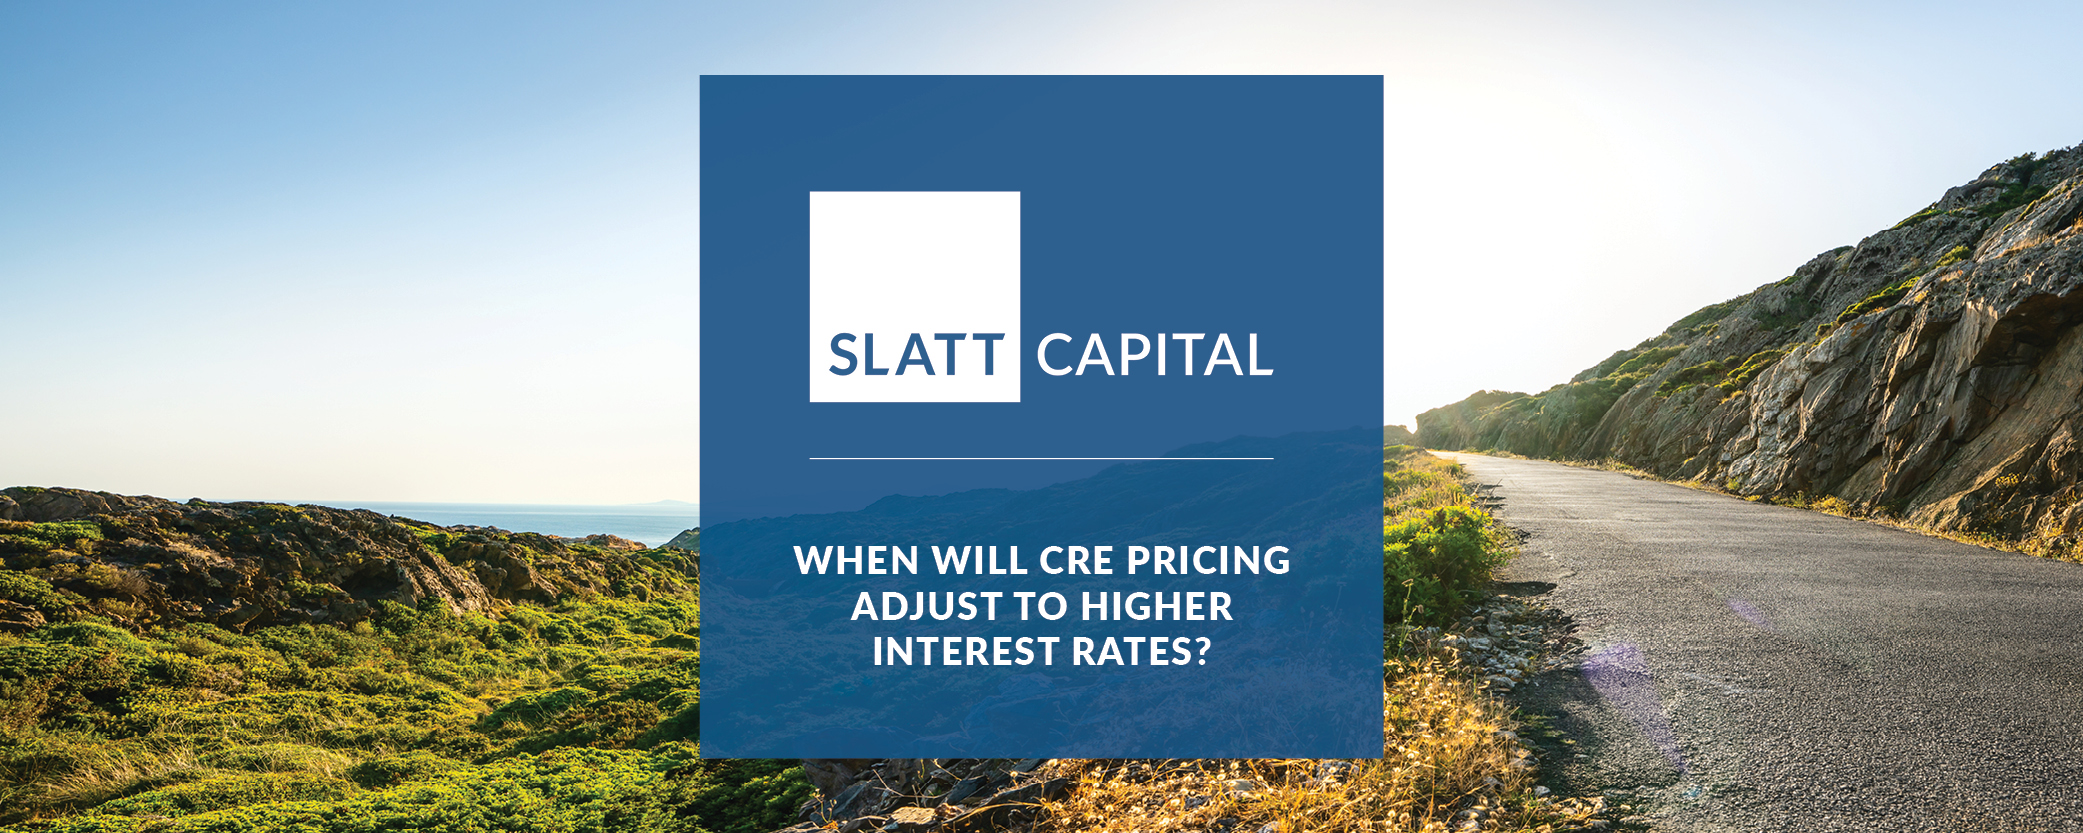 When will cre pricing adjust to higher interest rates?